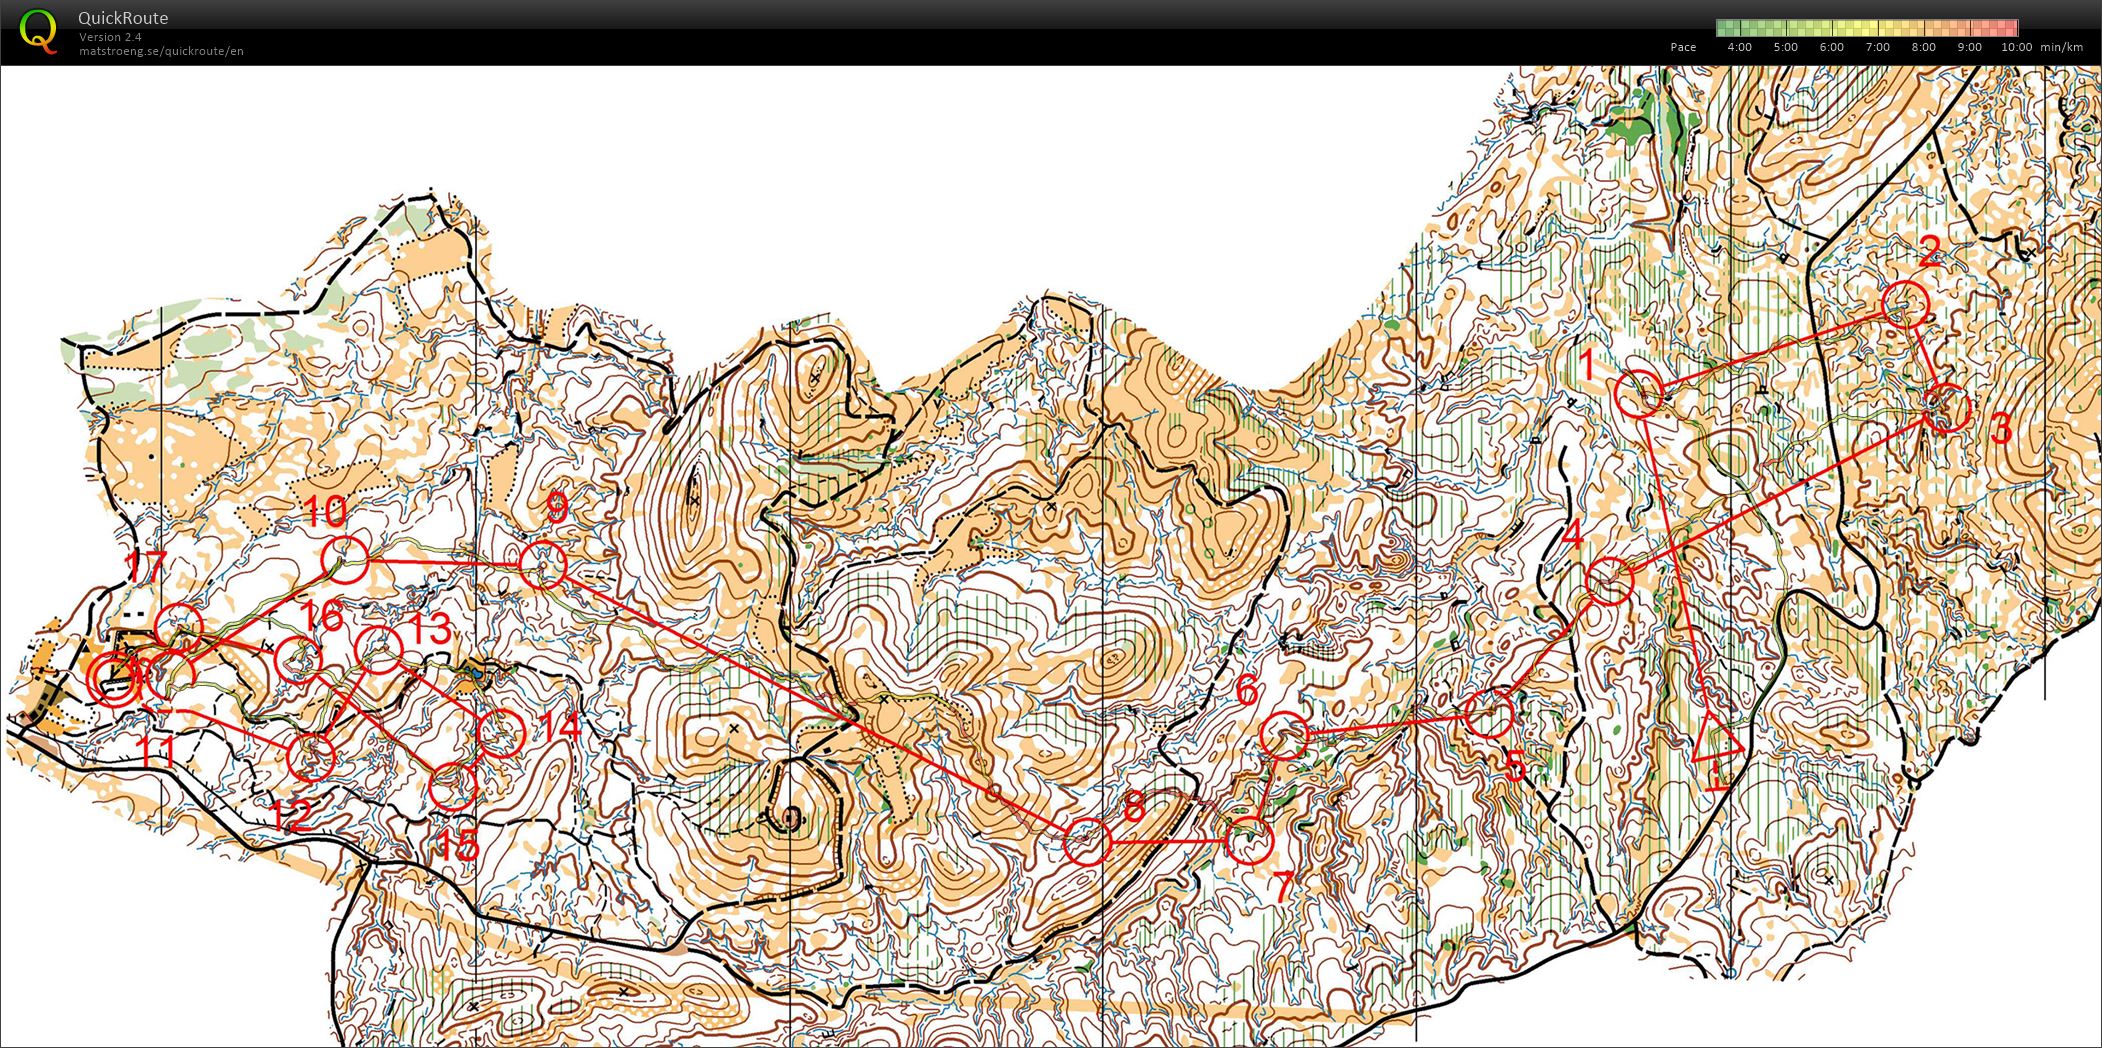 World Cup course W - middle  (31/12/2014)